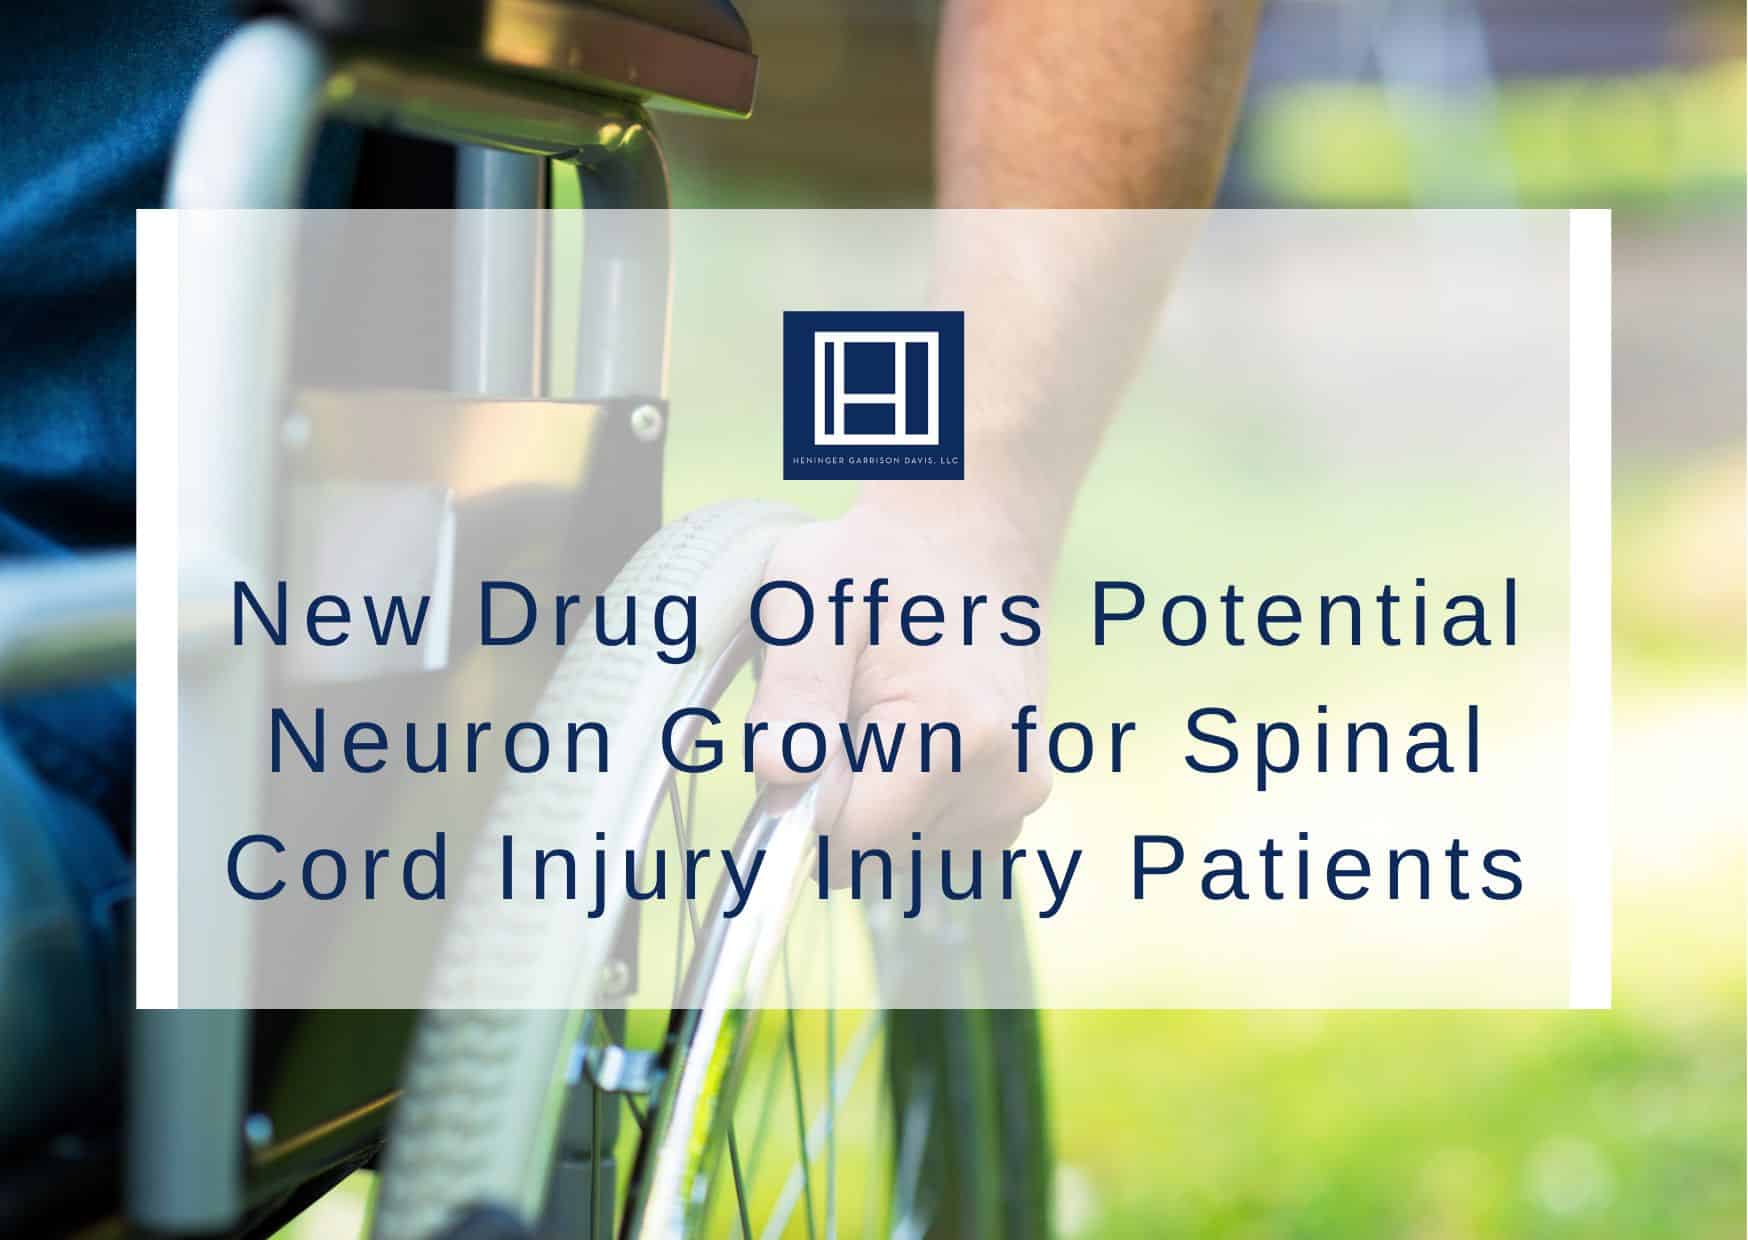 New Drug Offers Potential Neuron Grown for Spinal Cord Injury Injury Patients